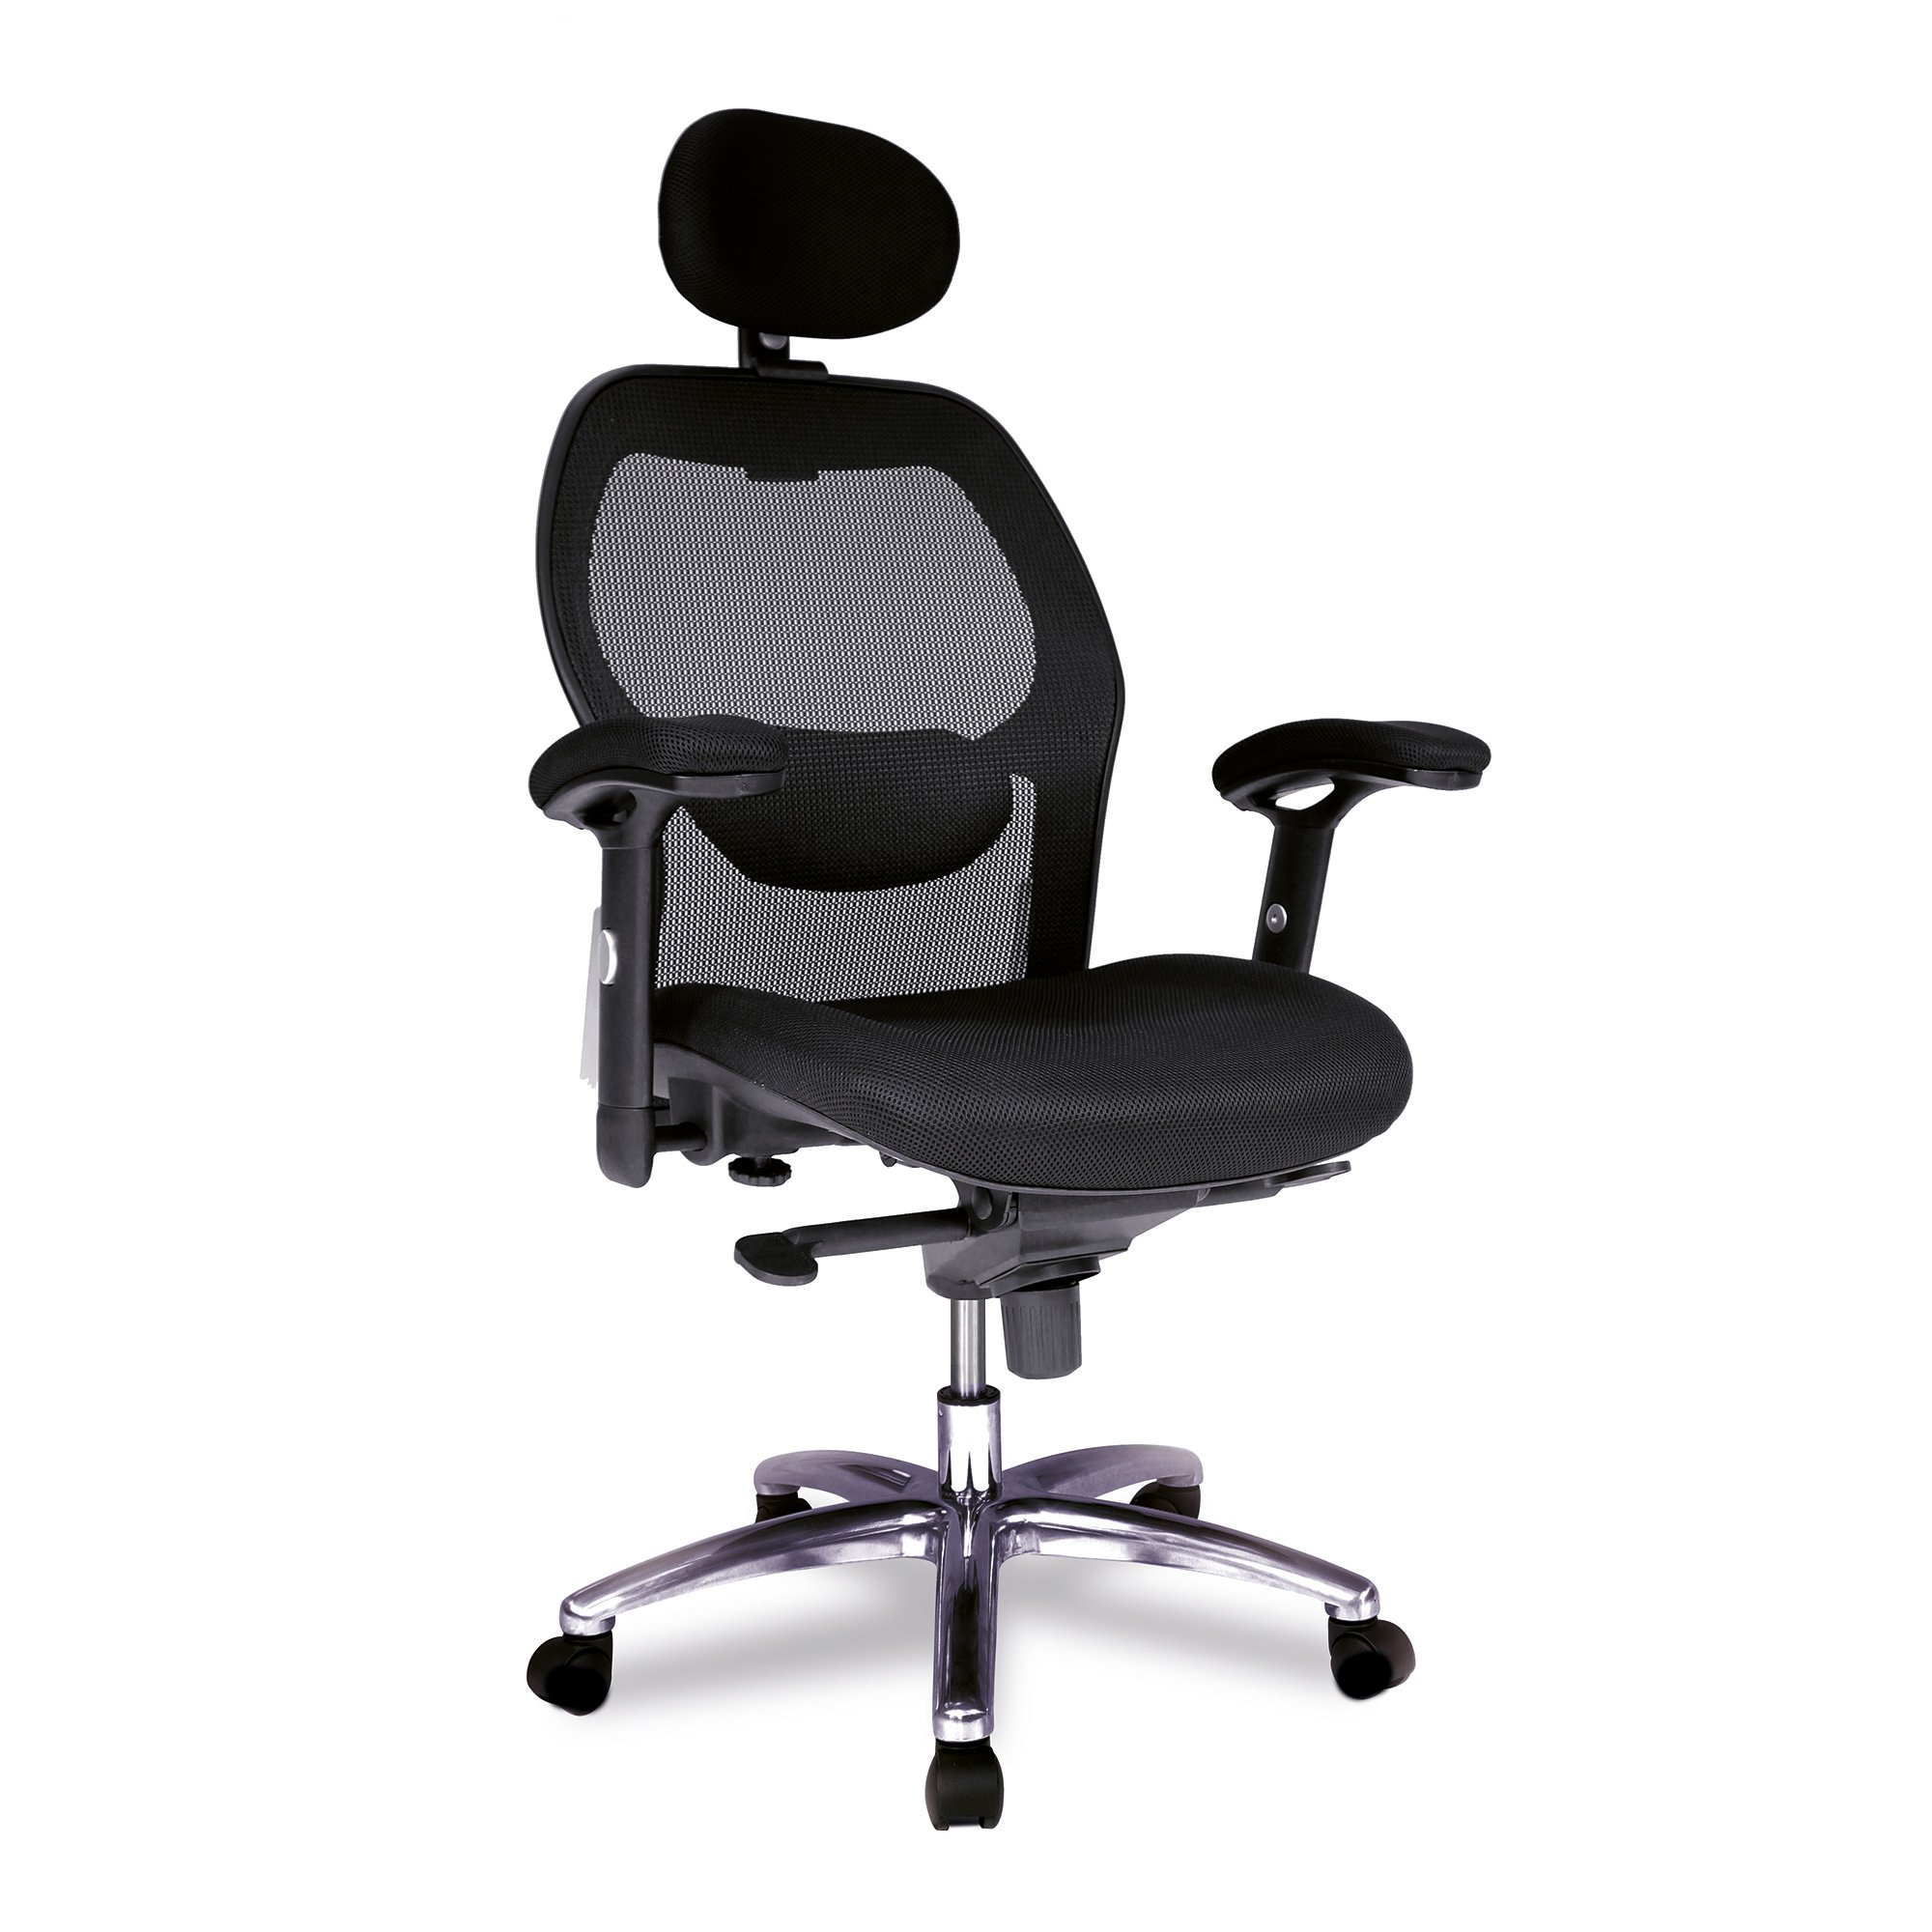 Nautilus Designs Hermes High Back Mesh Synchronous Executive Office Chair With A